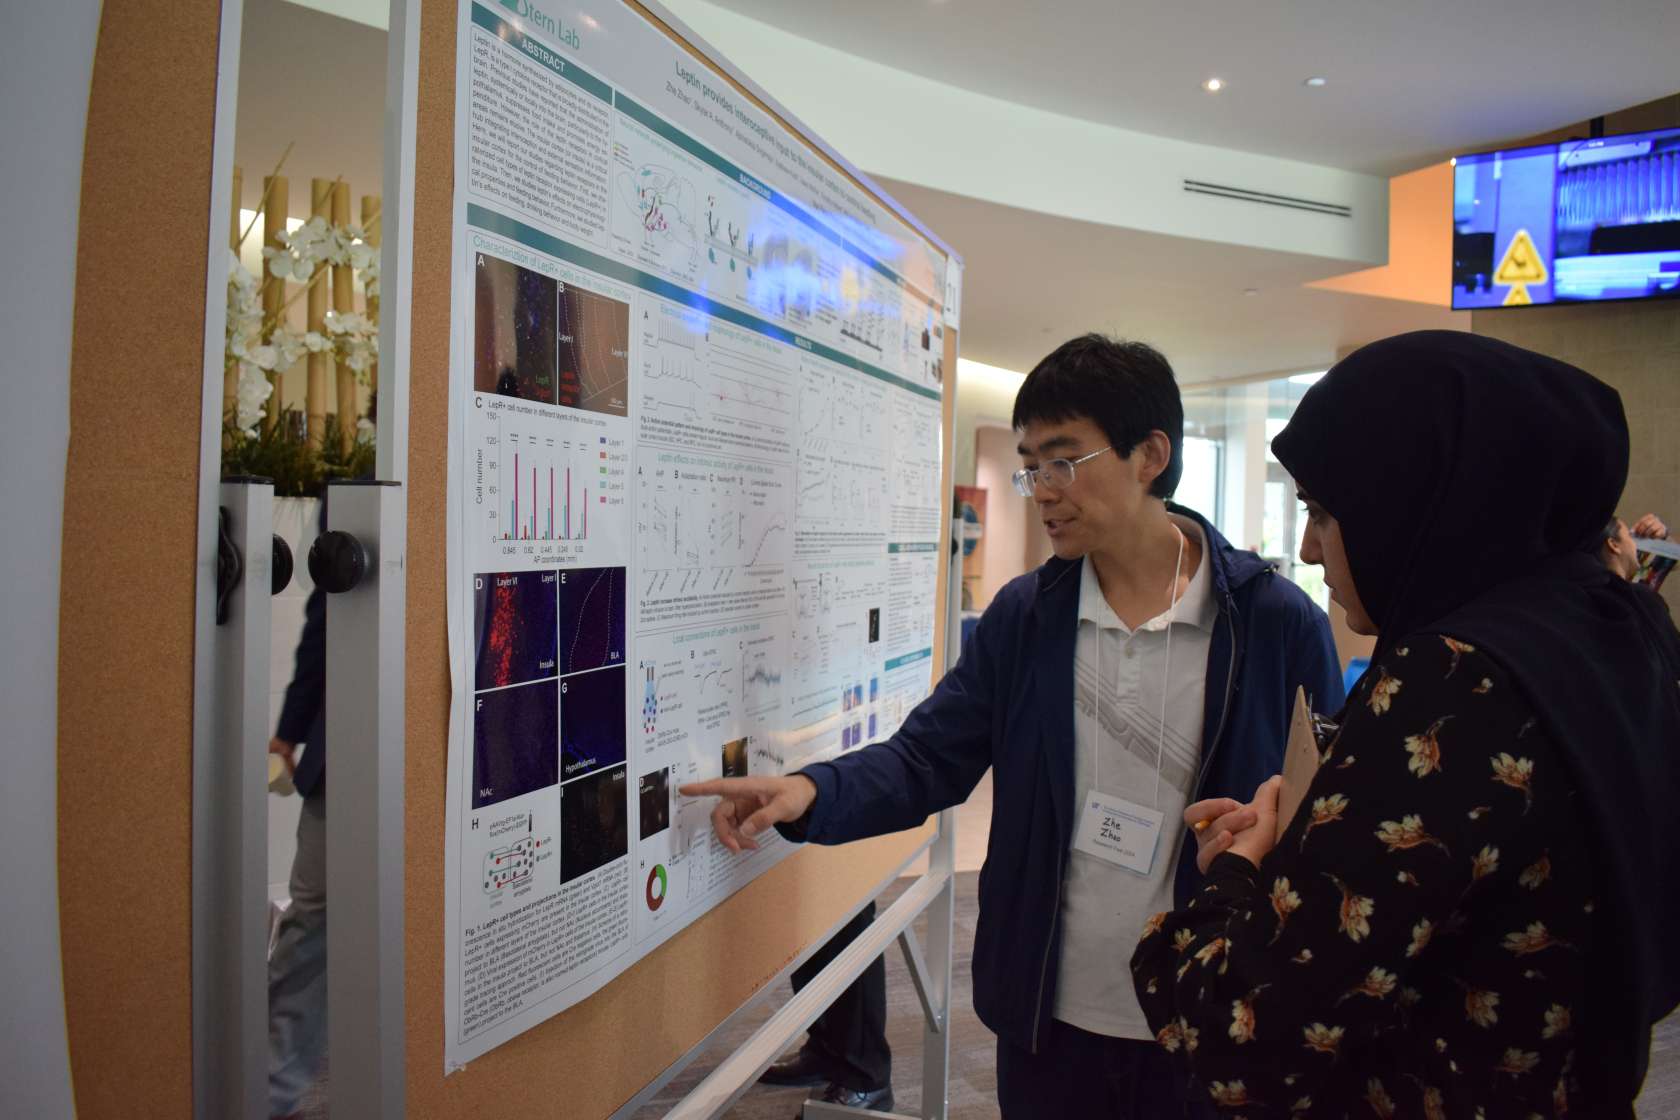 Research Fest 20245 posters 7 mpfi